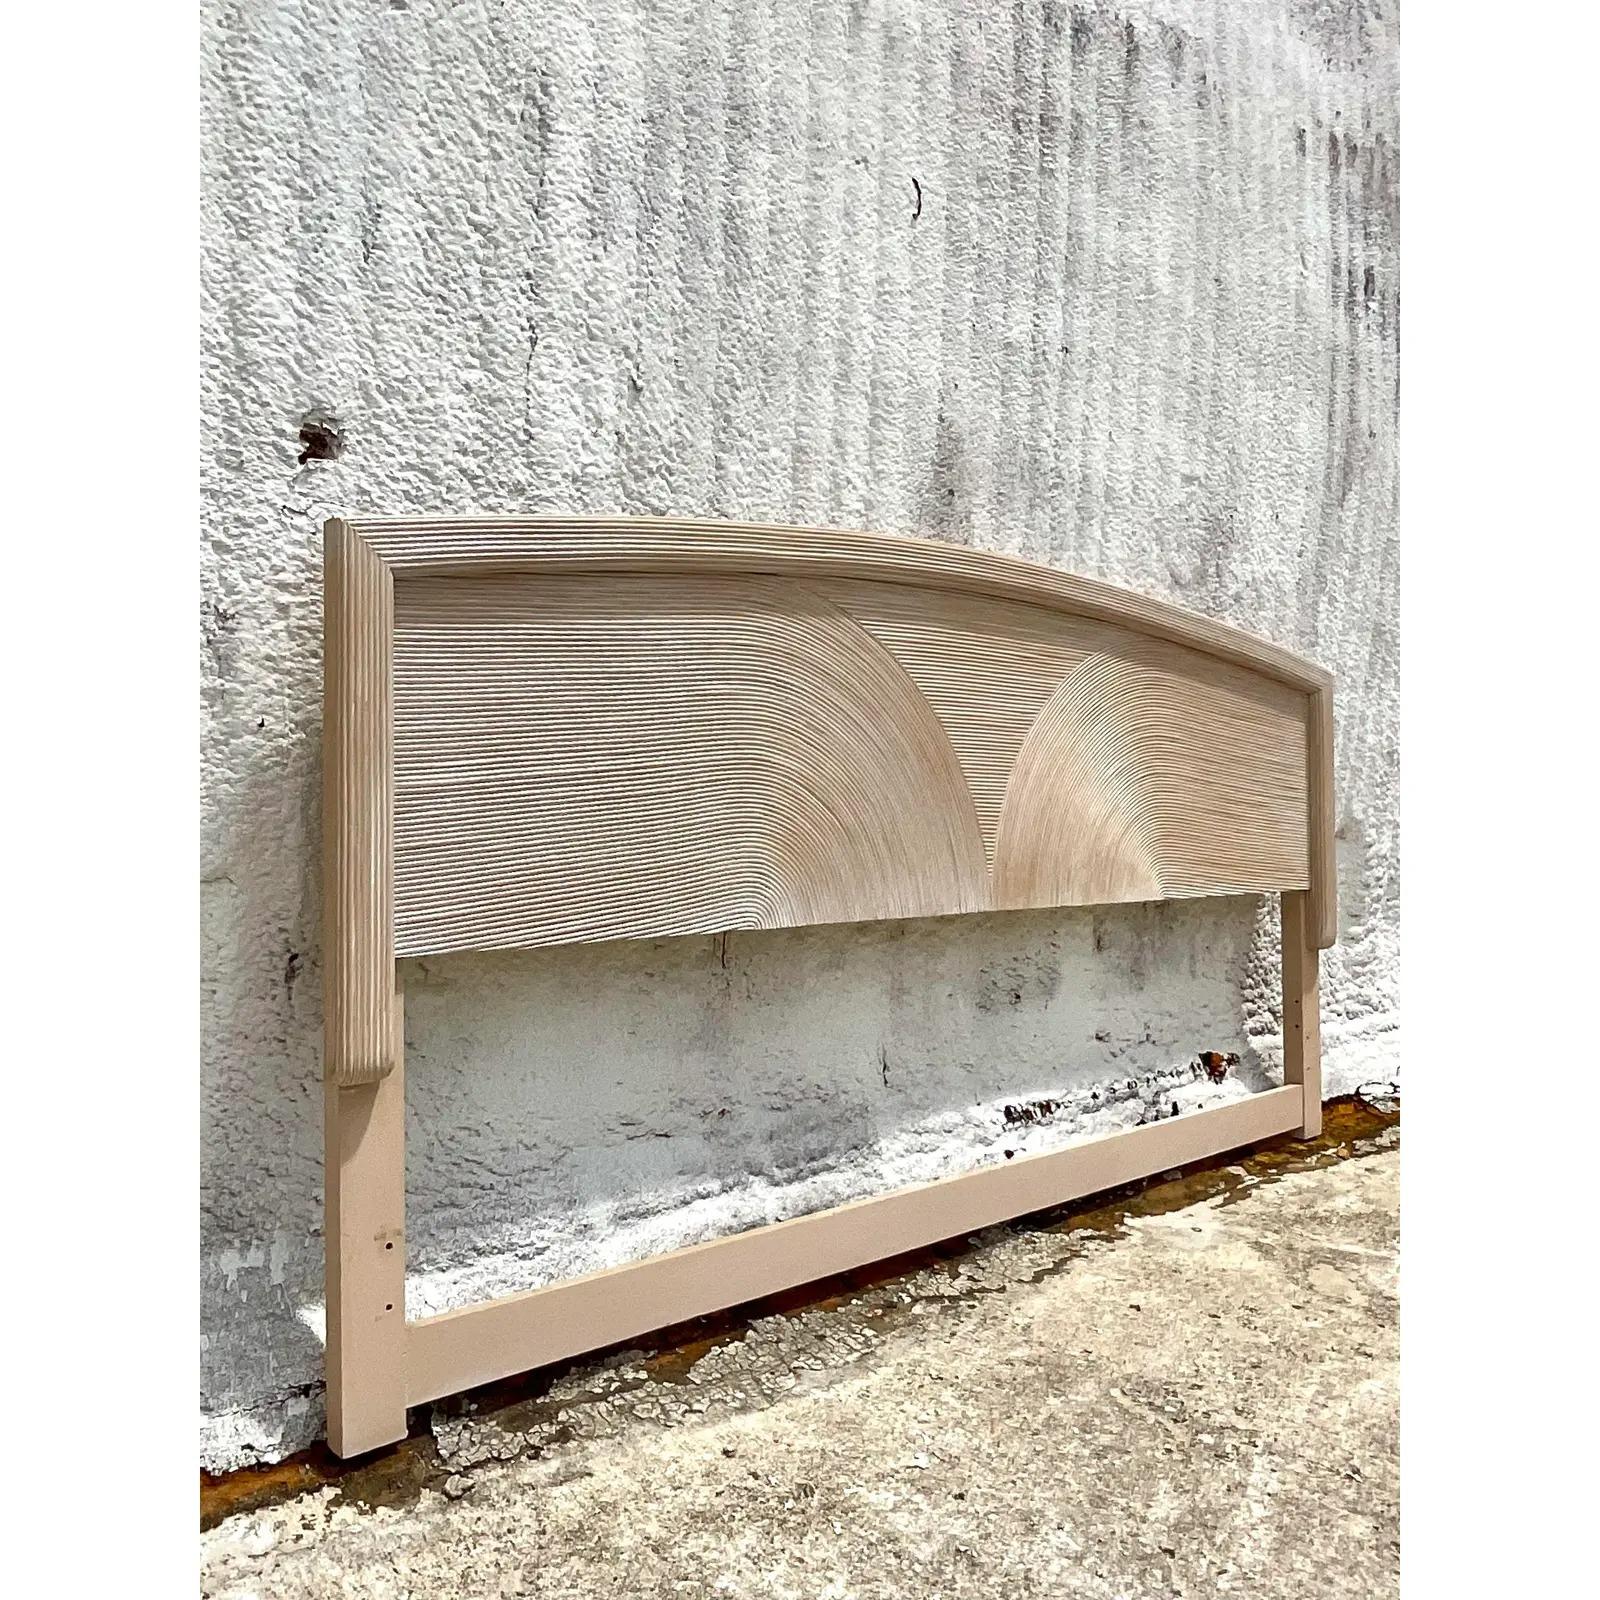 Vintage Coastal King size headboard. Beautiful cerused pencil reed construction in a low arch design. Acquired from a Palm Beach estate.